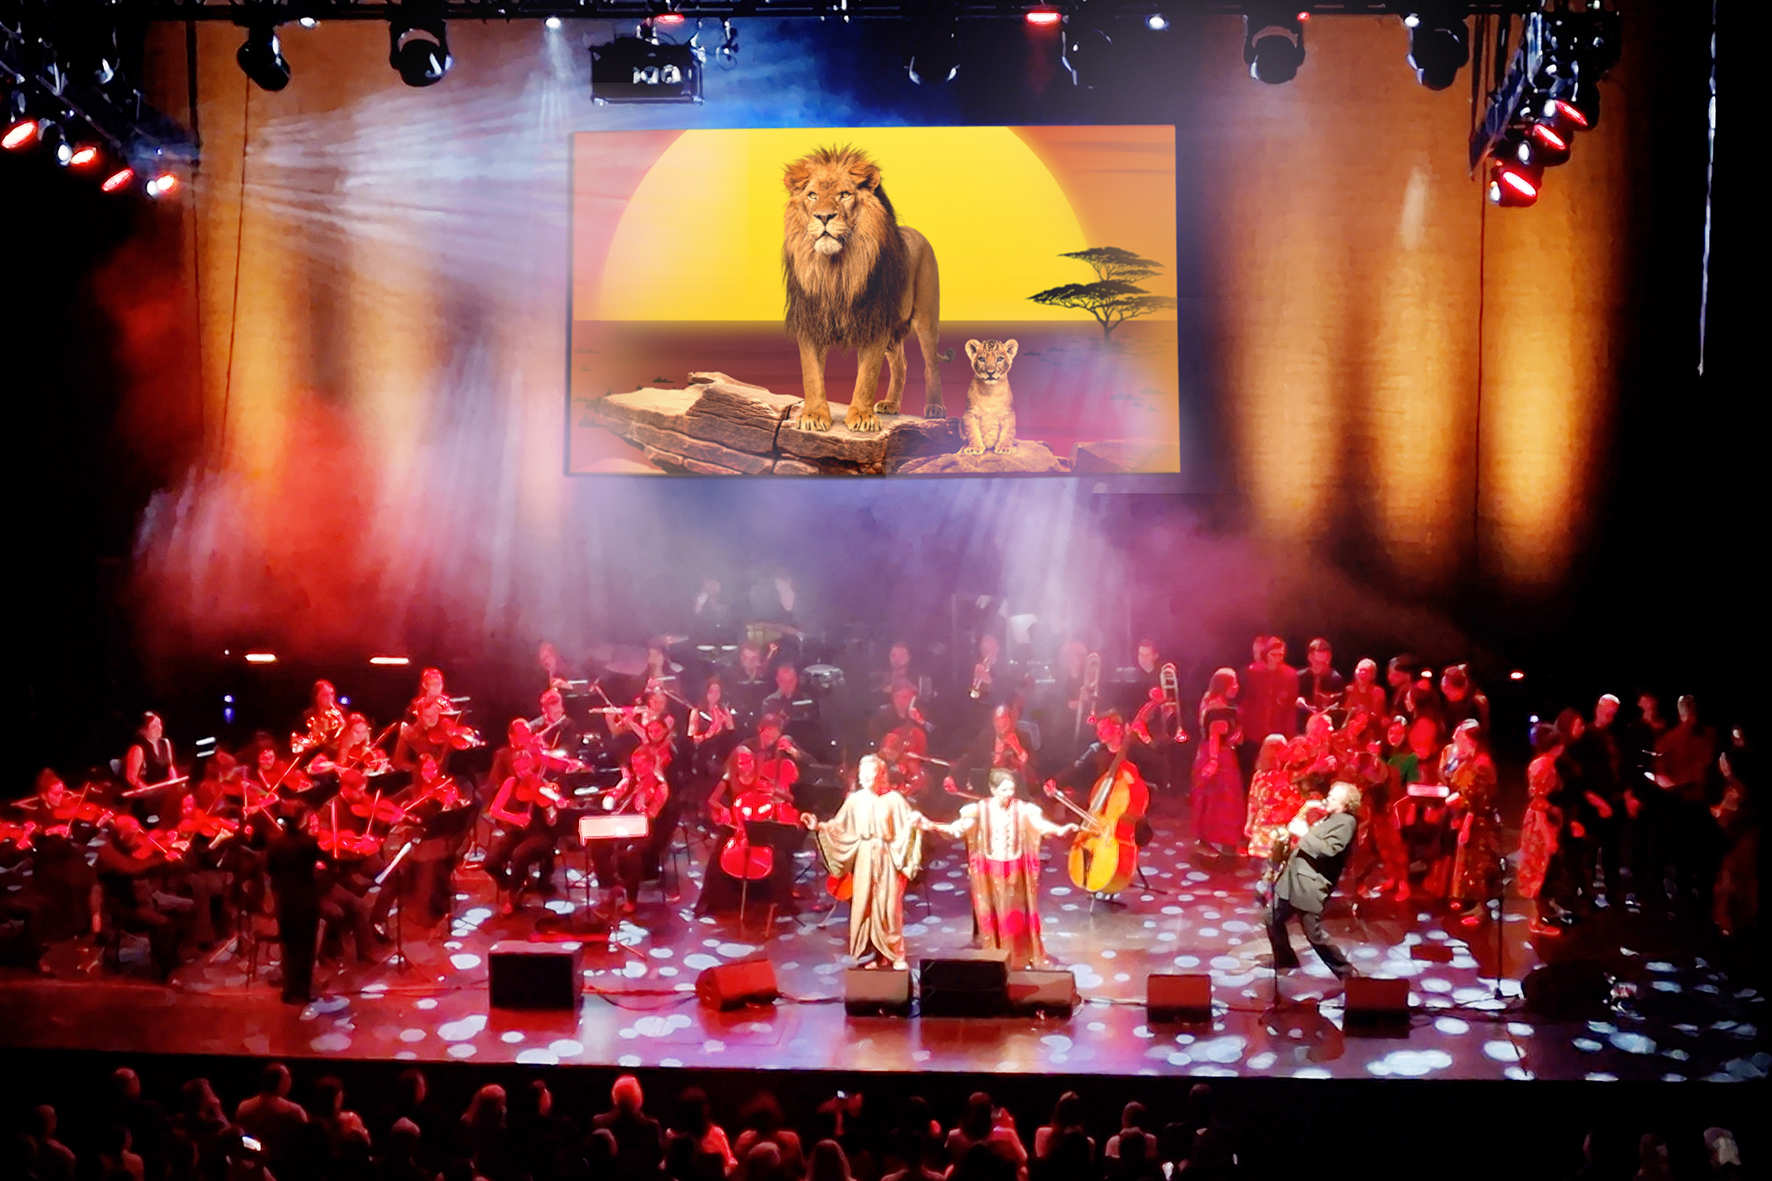 A colourfully lit stage with orchestra and singers. In the background a screen on which a lion can be seen.